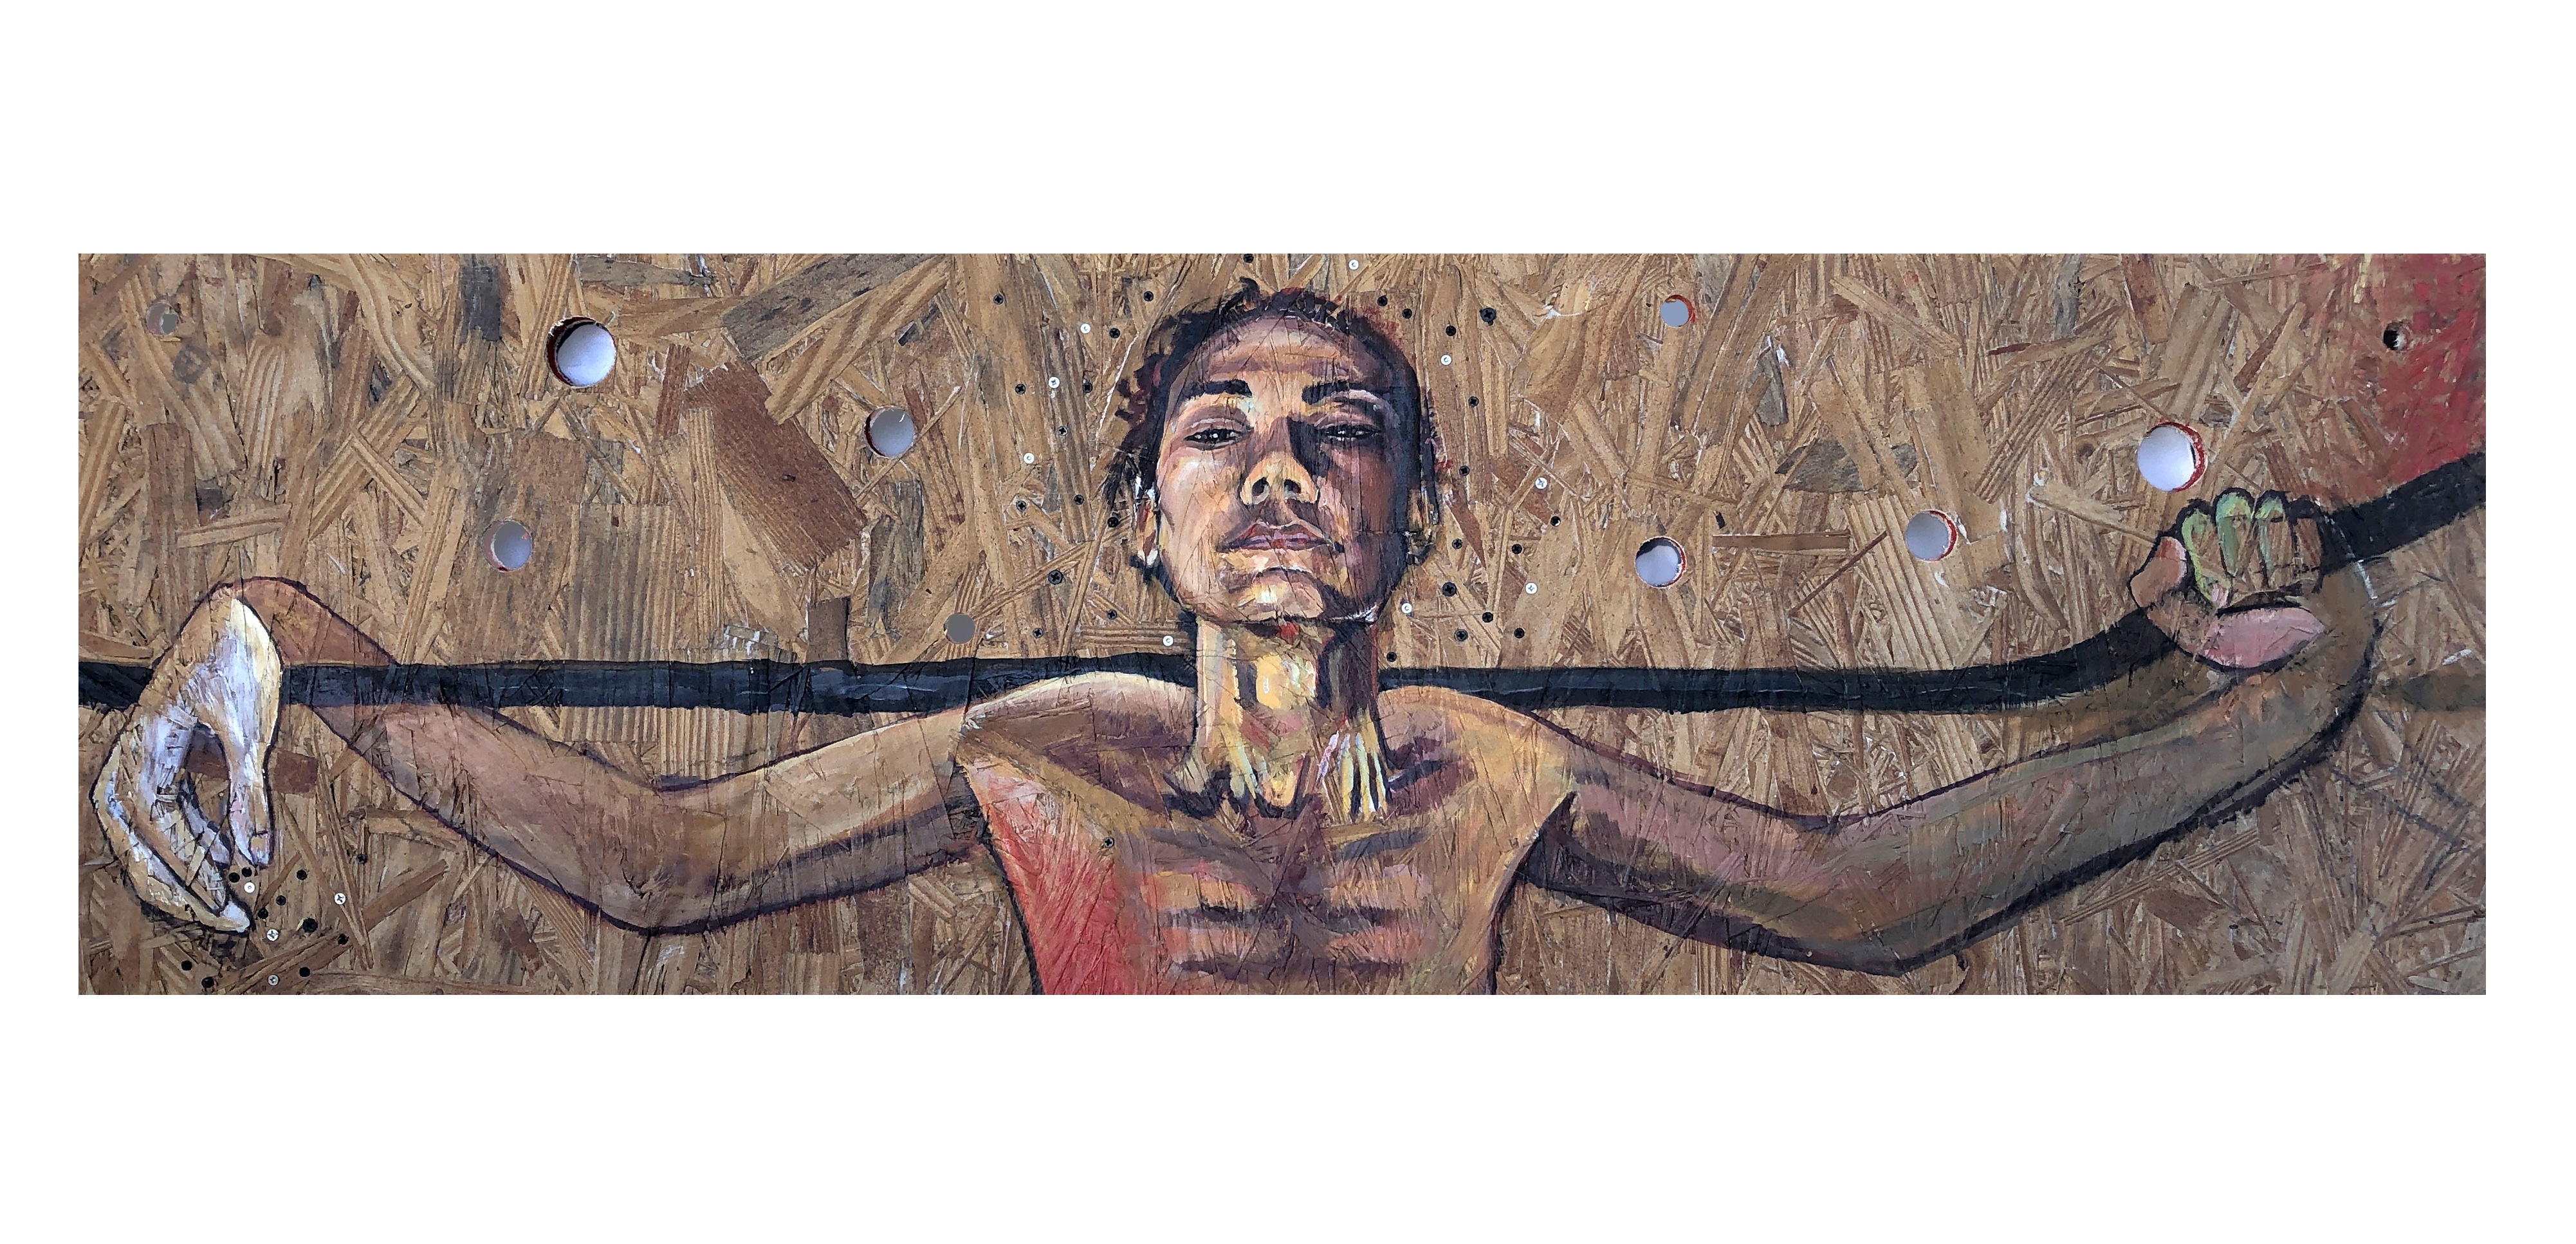 Sally Binard's 'Reclamation' shows a painted woman's face and outstretched arms with a metal across her shoulders on a found wooden board